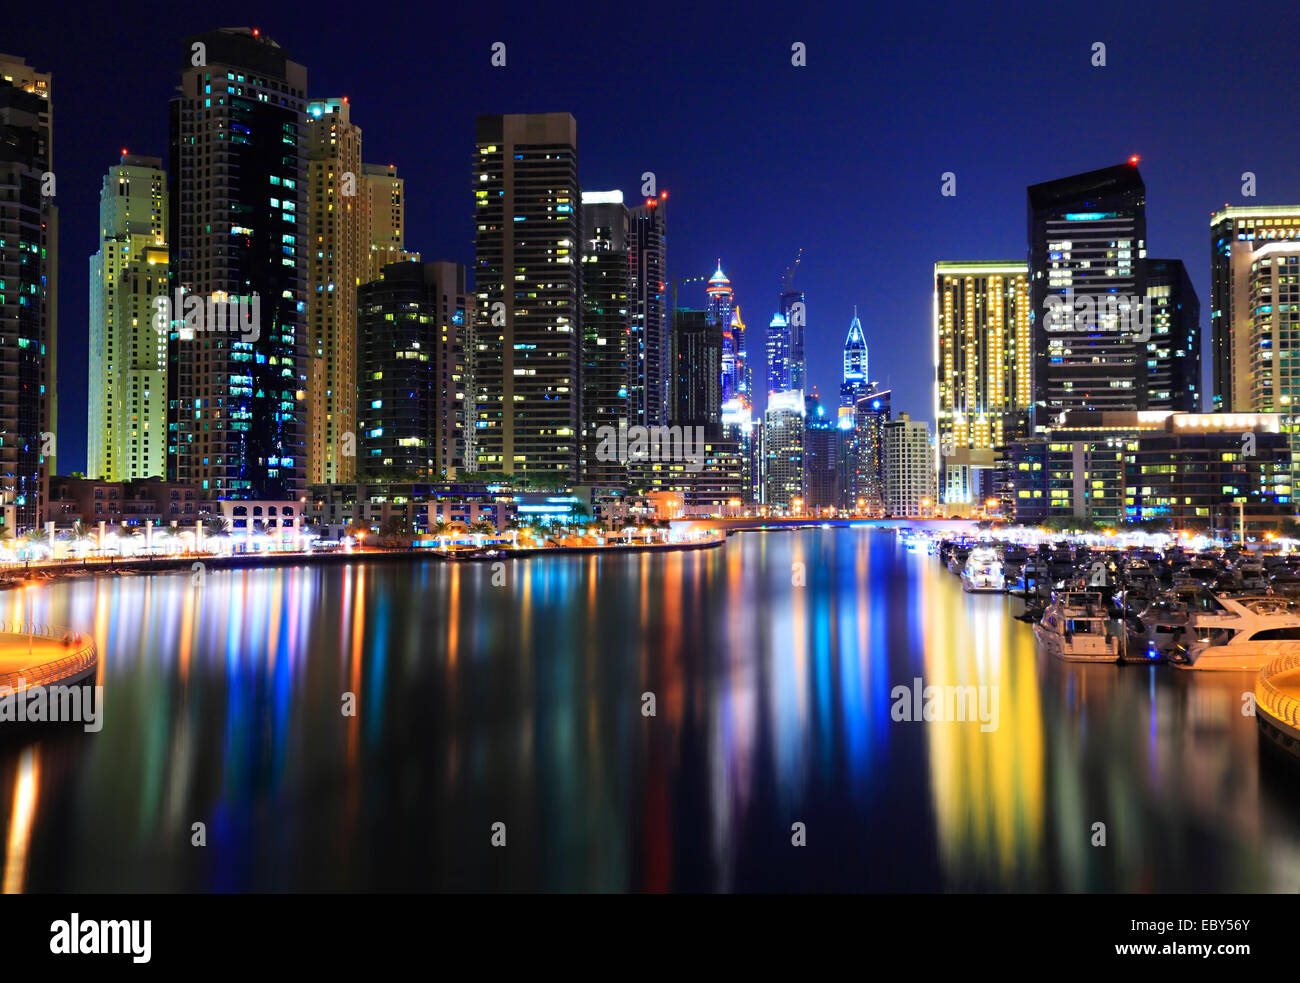 Dubai Marina at night. Reflections of skyscrapers in water Stock Photo